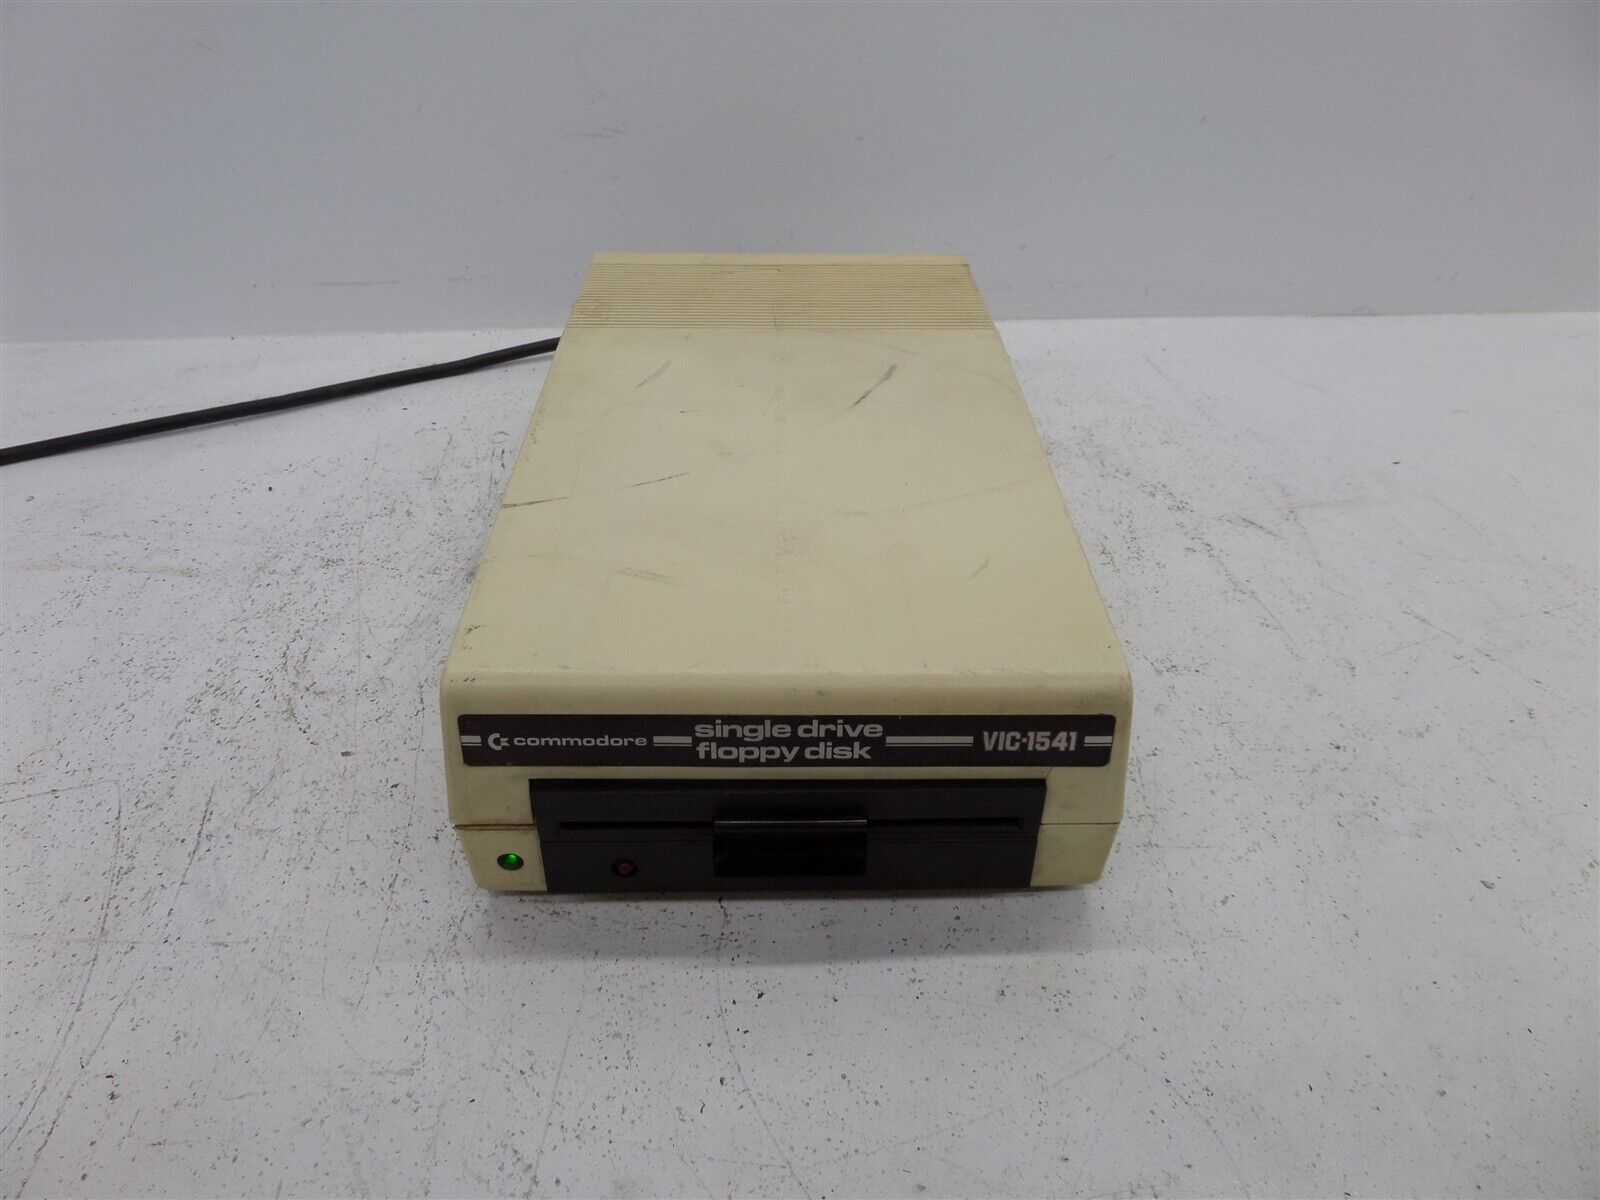 Vintage Commodore VIC-1541 Floppy Disk Drive